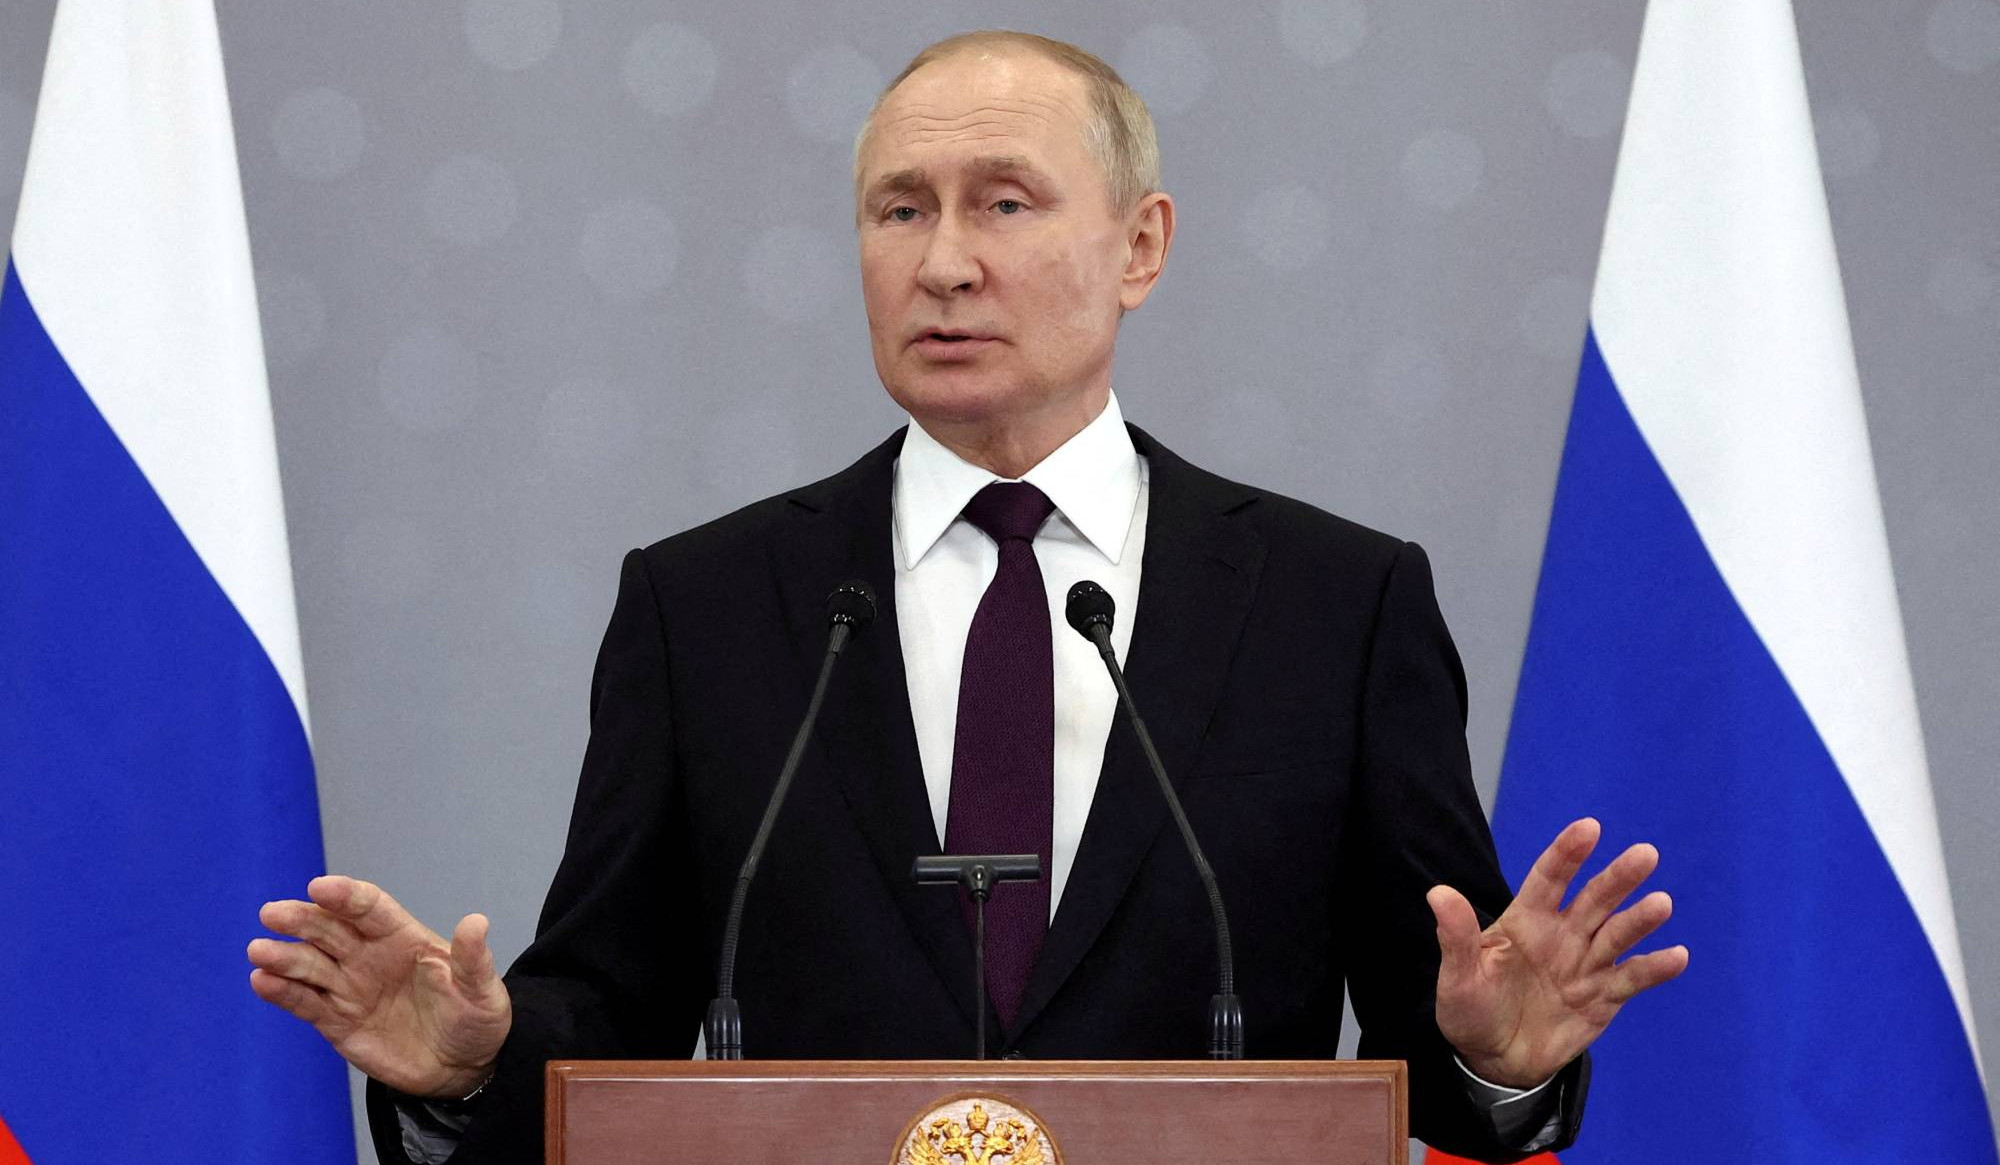 Putin slams Western countries' interference in Russia's internal affairs